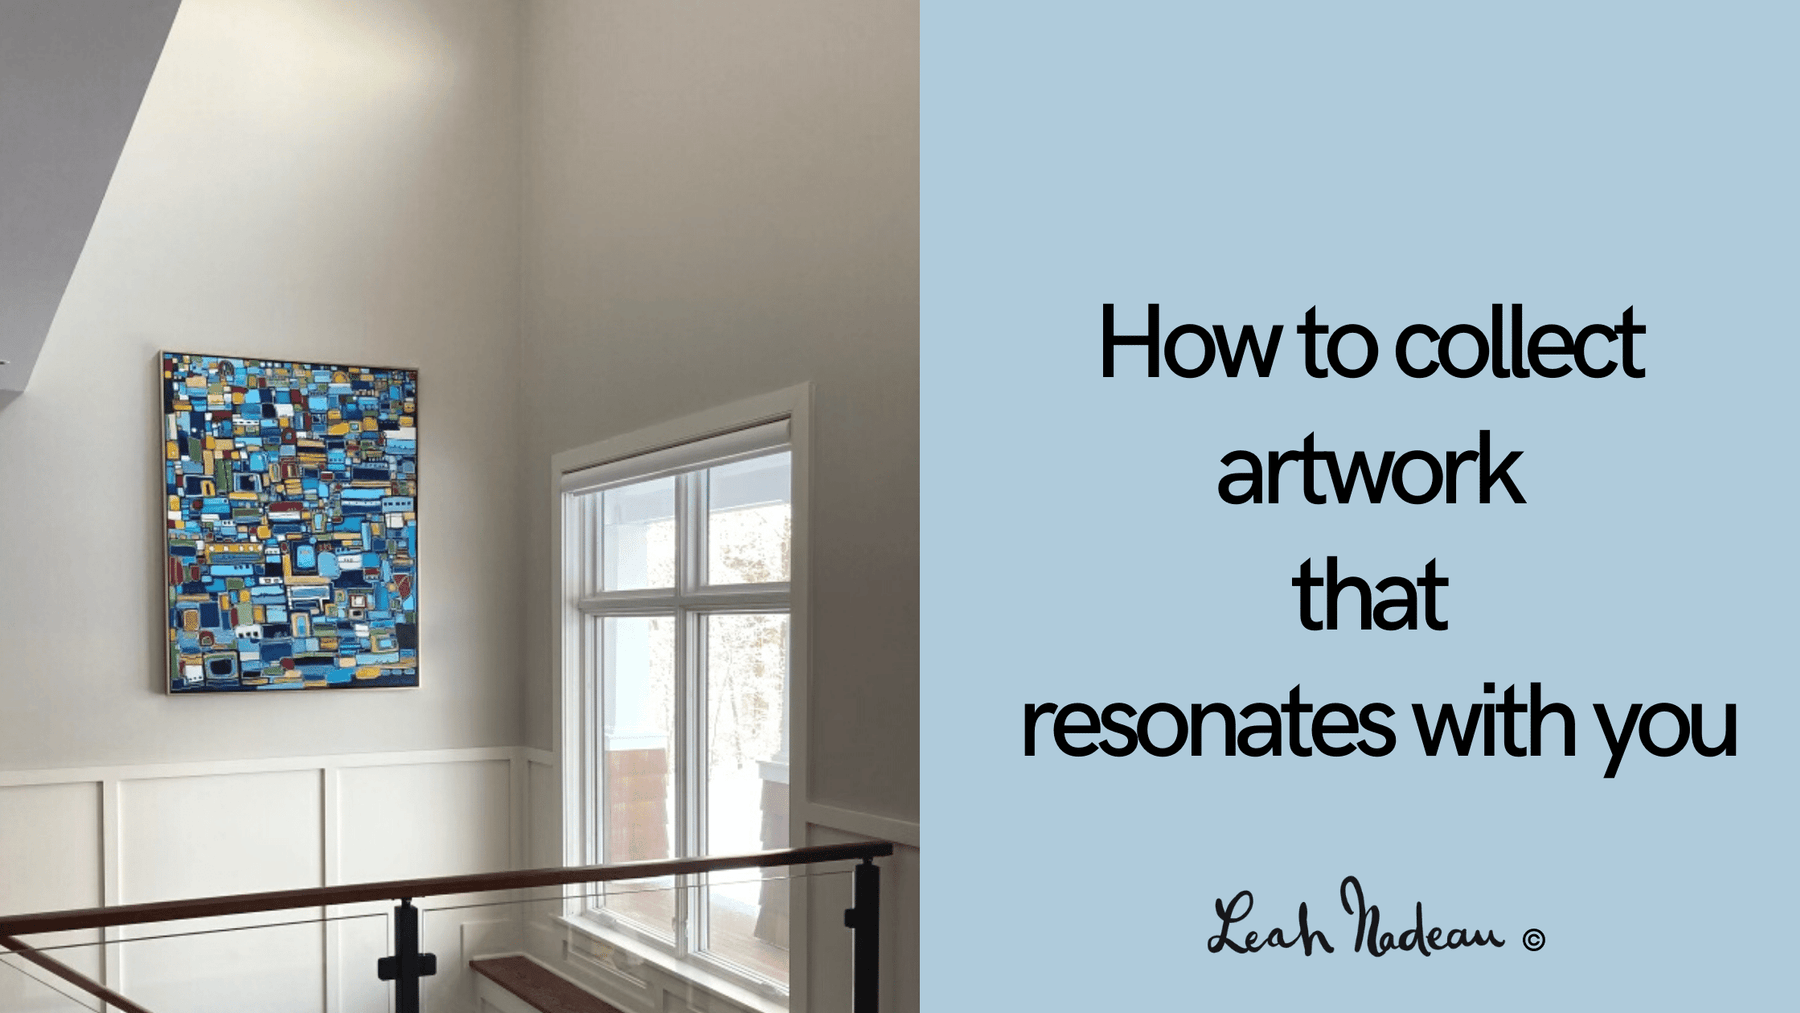 How to collect artwork that resonates with you